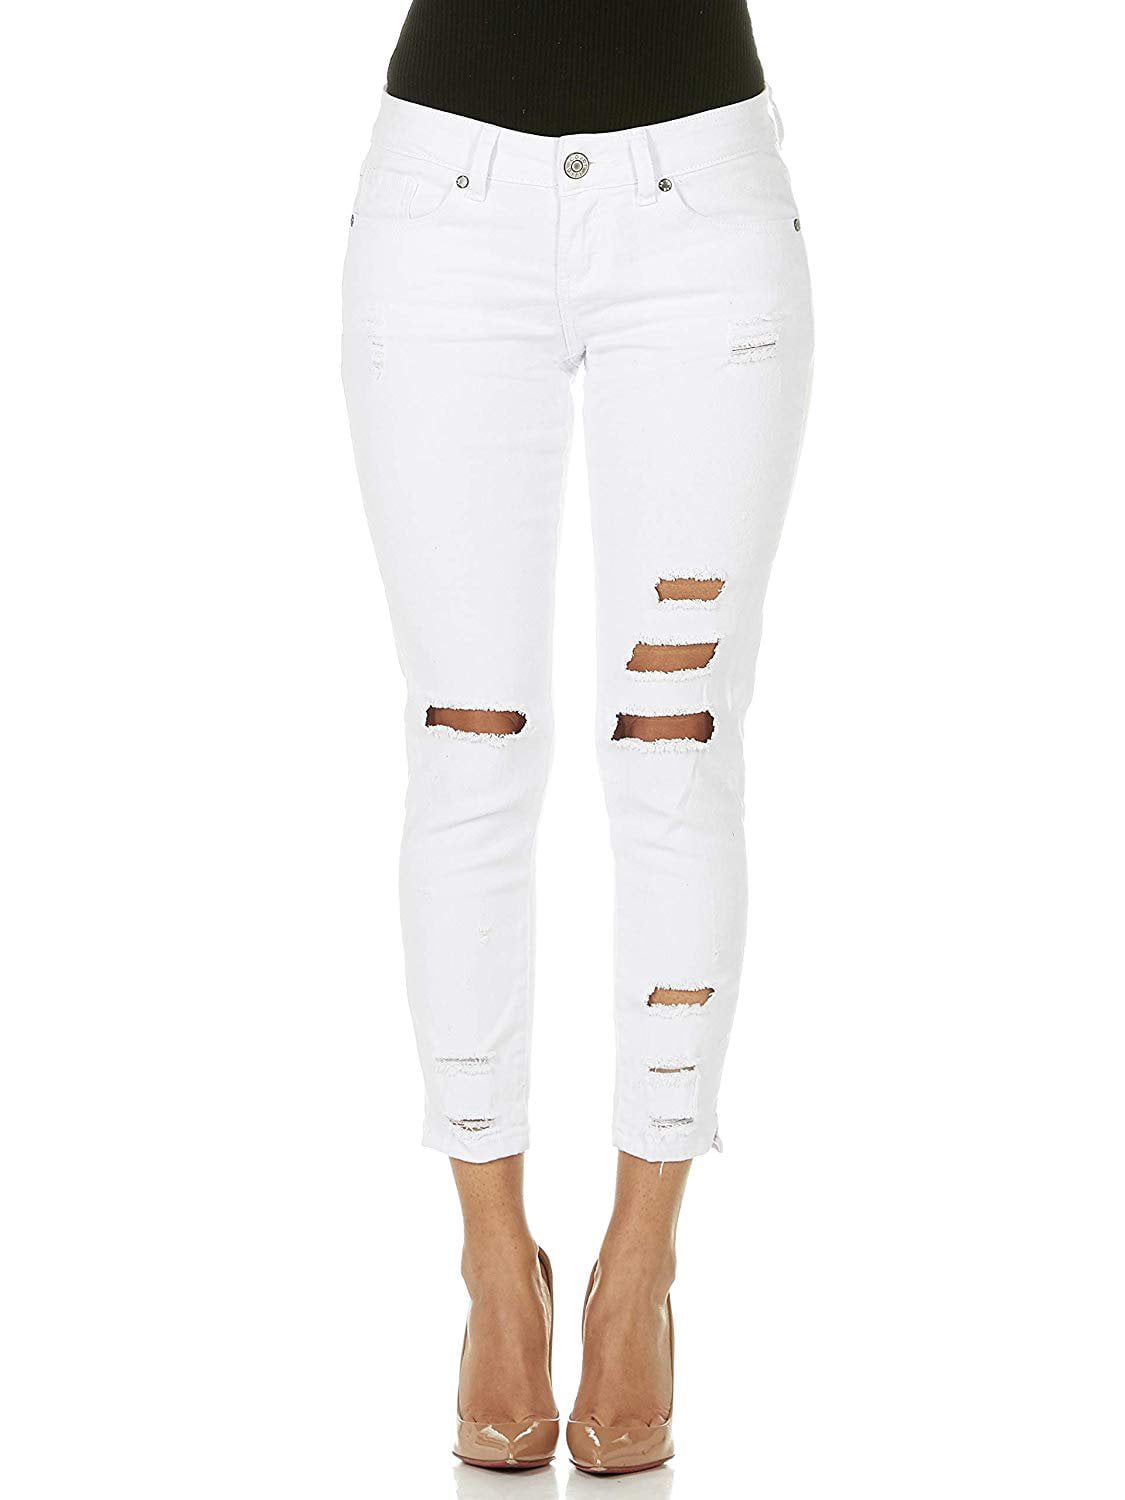 CG JEANS Womens Junior Plus-Size Cute Juniors Big Mid Rise Large Ripped ...